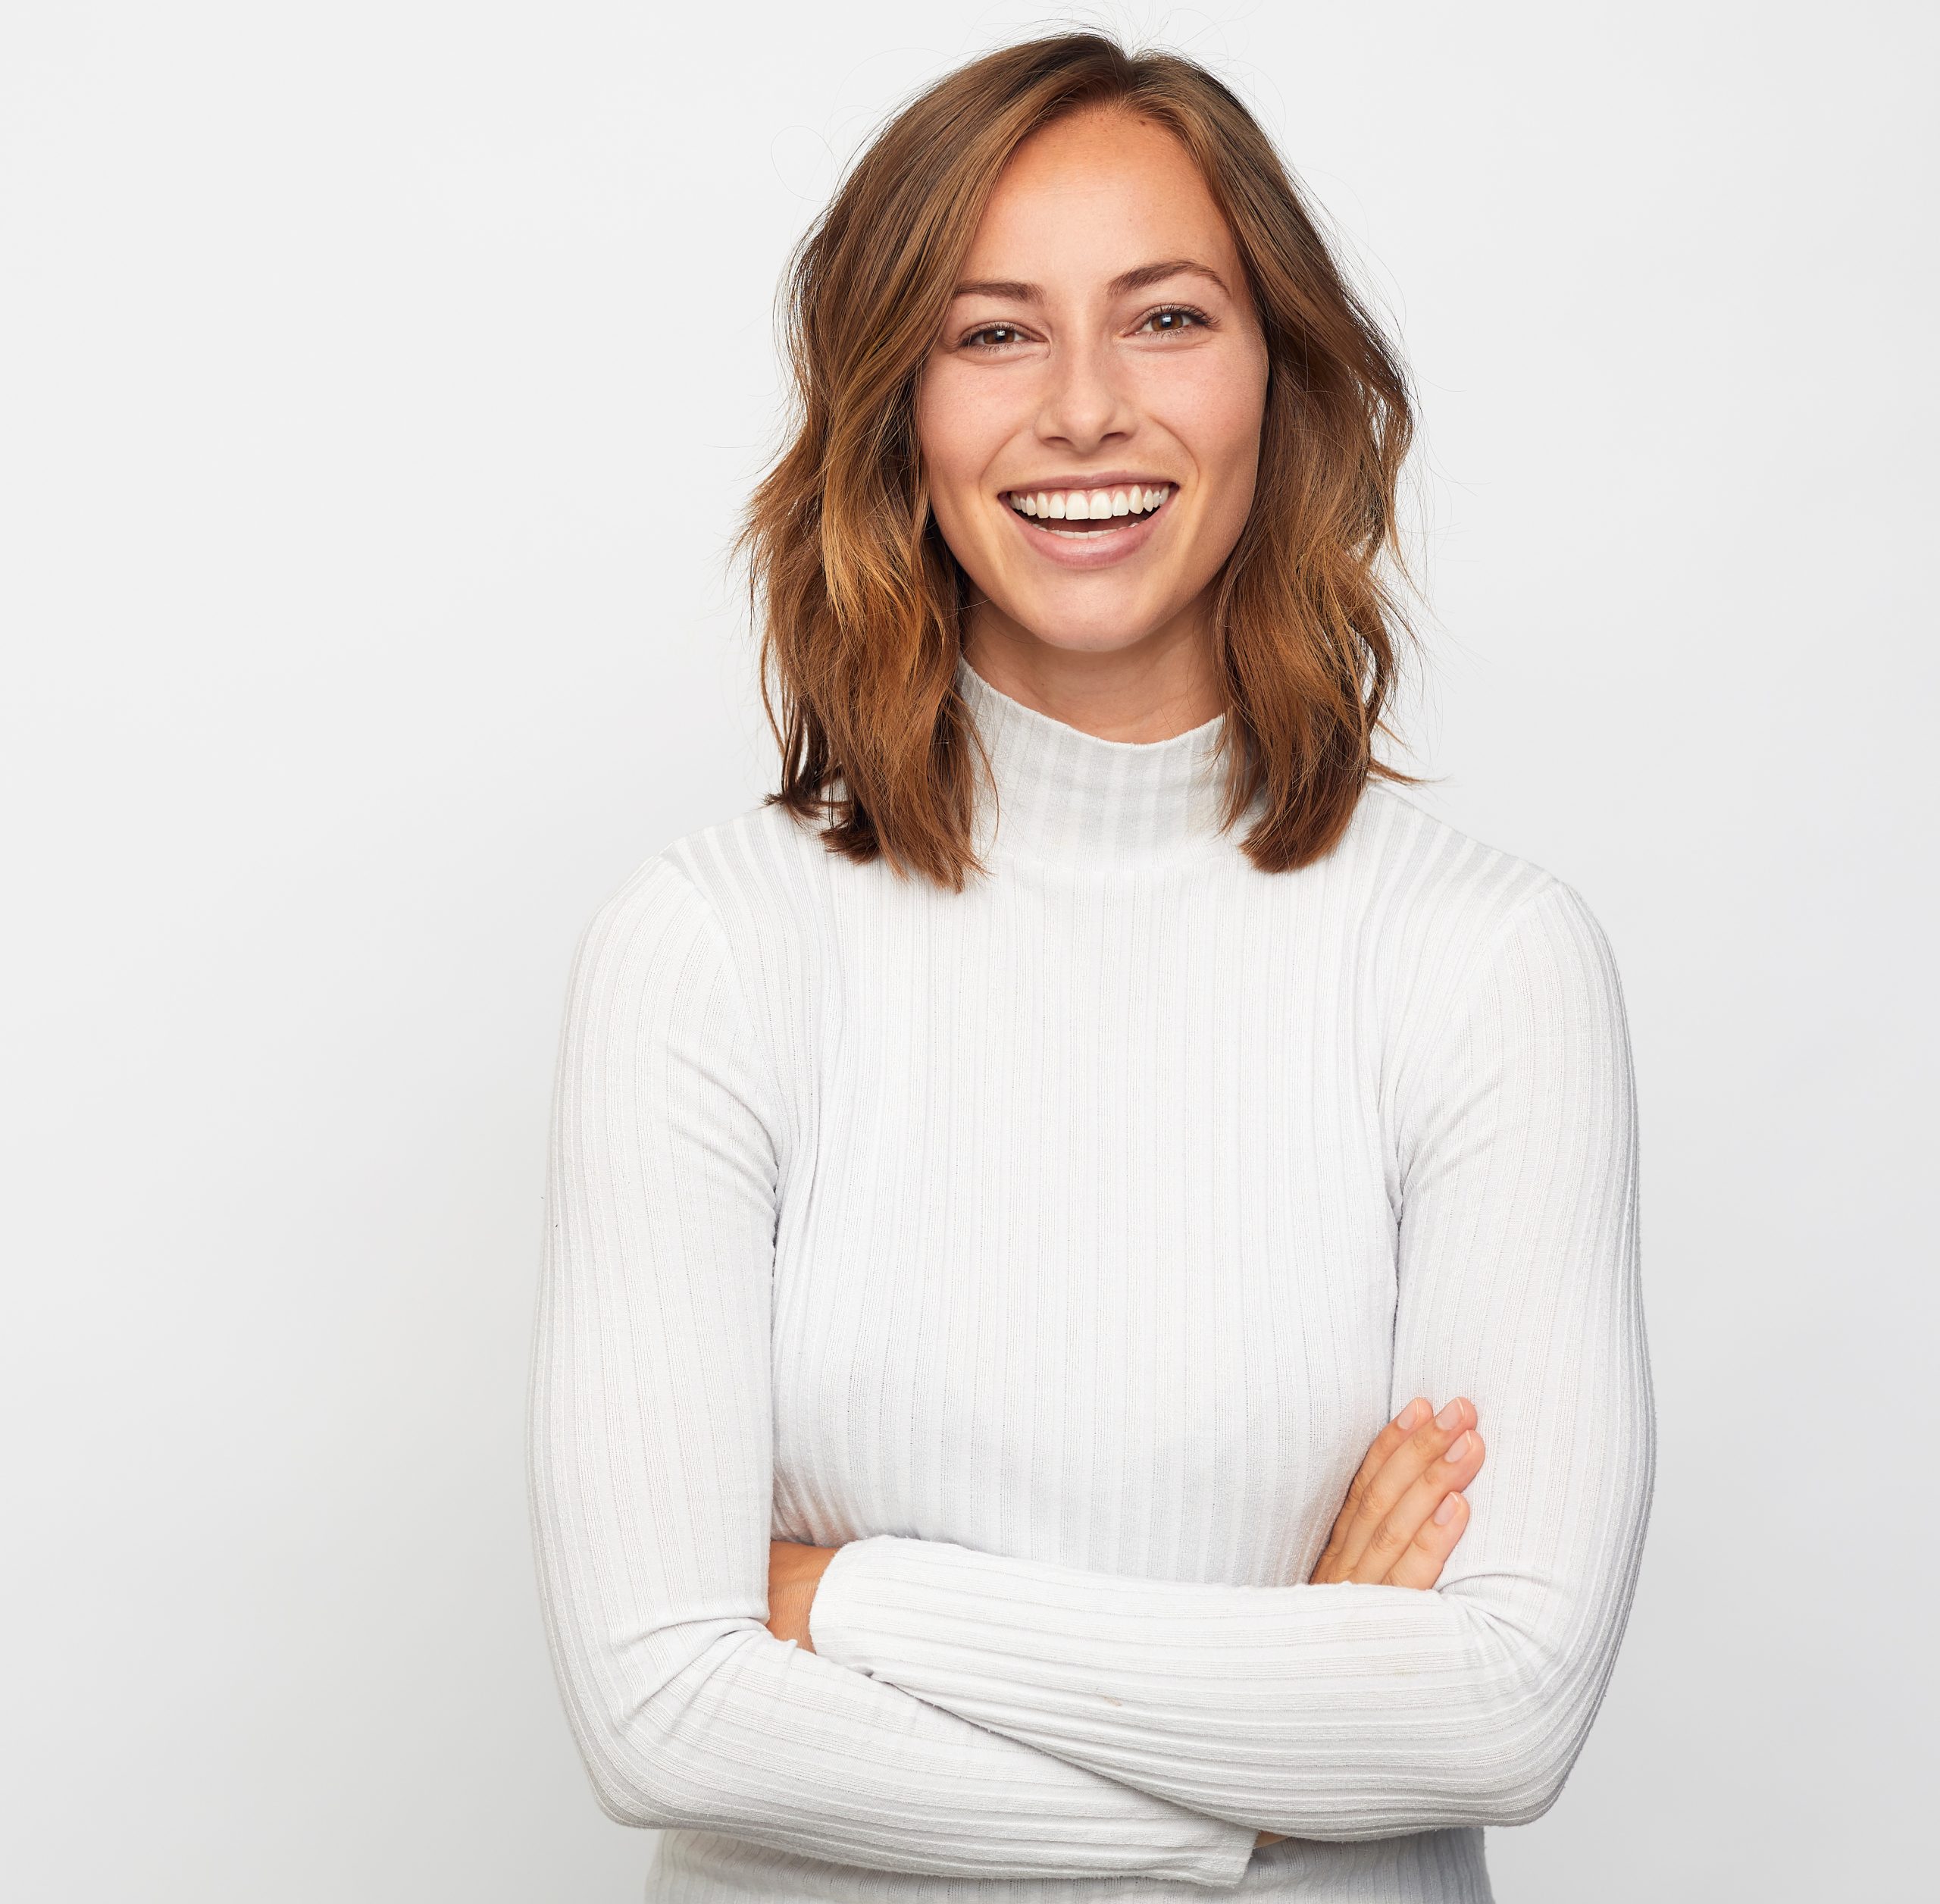 portrait of a smiling young woman in a white long sleeve shirt with her arms crossed in front of a light grey background